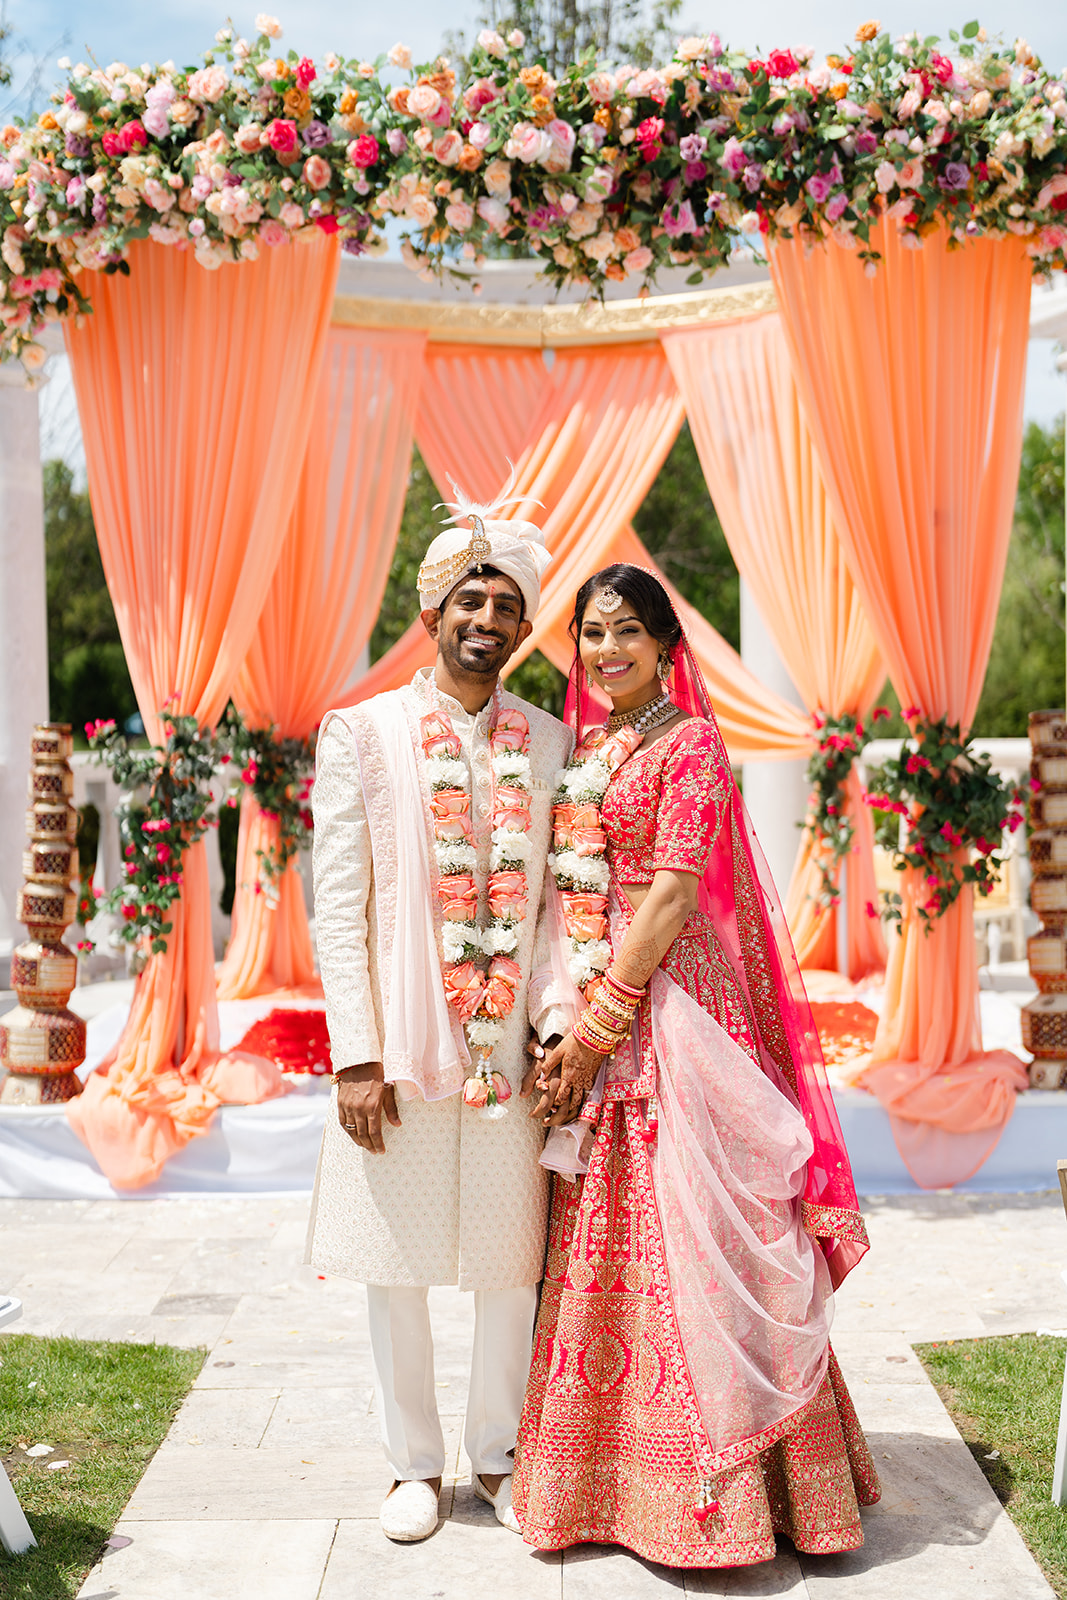 Bride and groom portraits from a colorful New Jersey wedding at The Mansion on Main